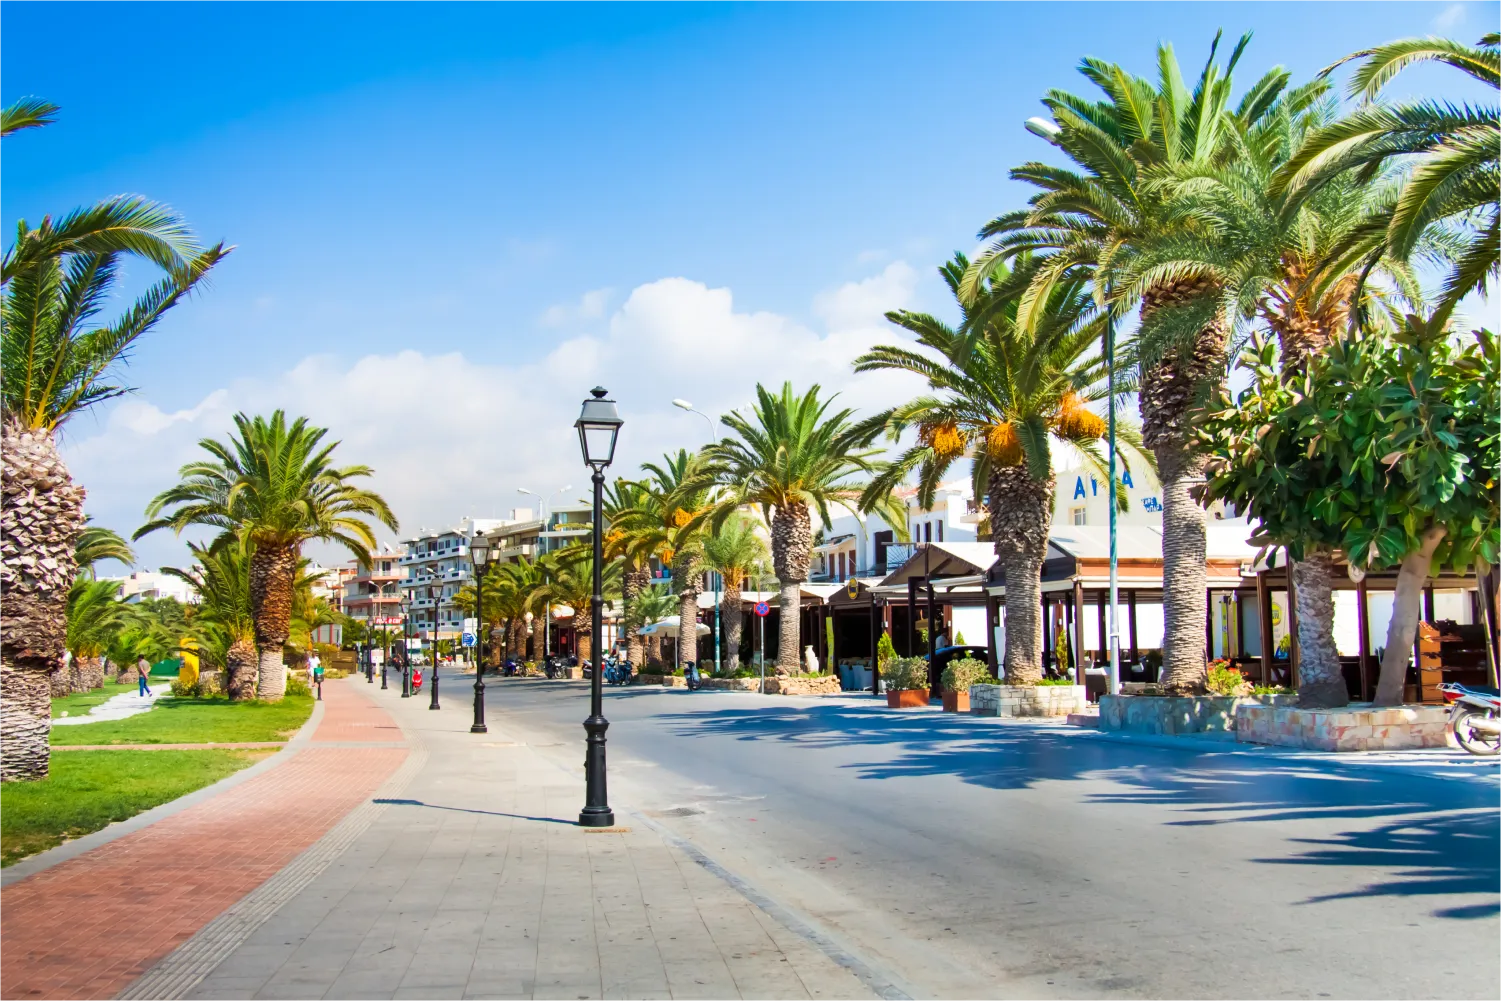 Touristic Street With Palm Trees Along The Seafront In The Old Town Of Rethymno